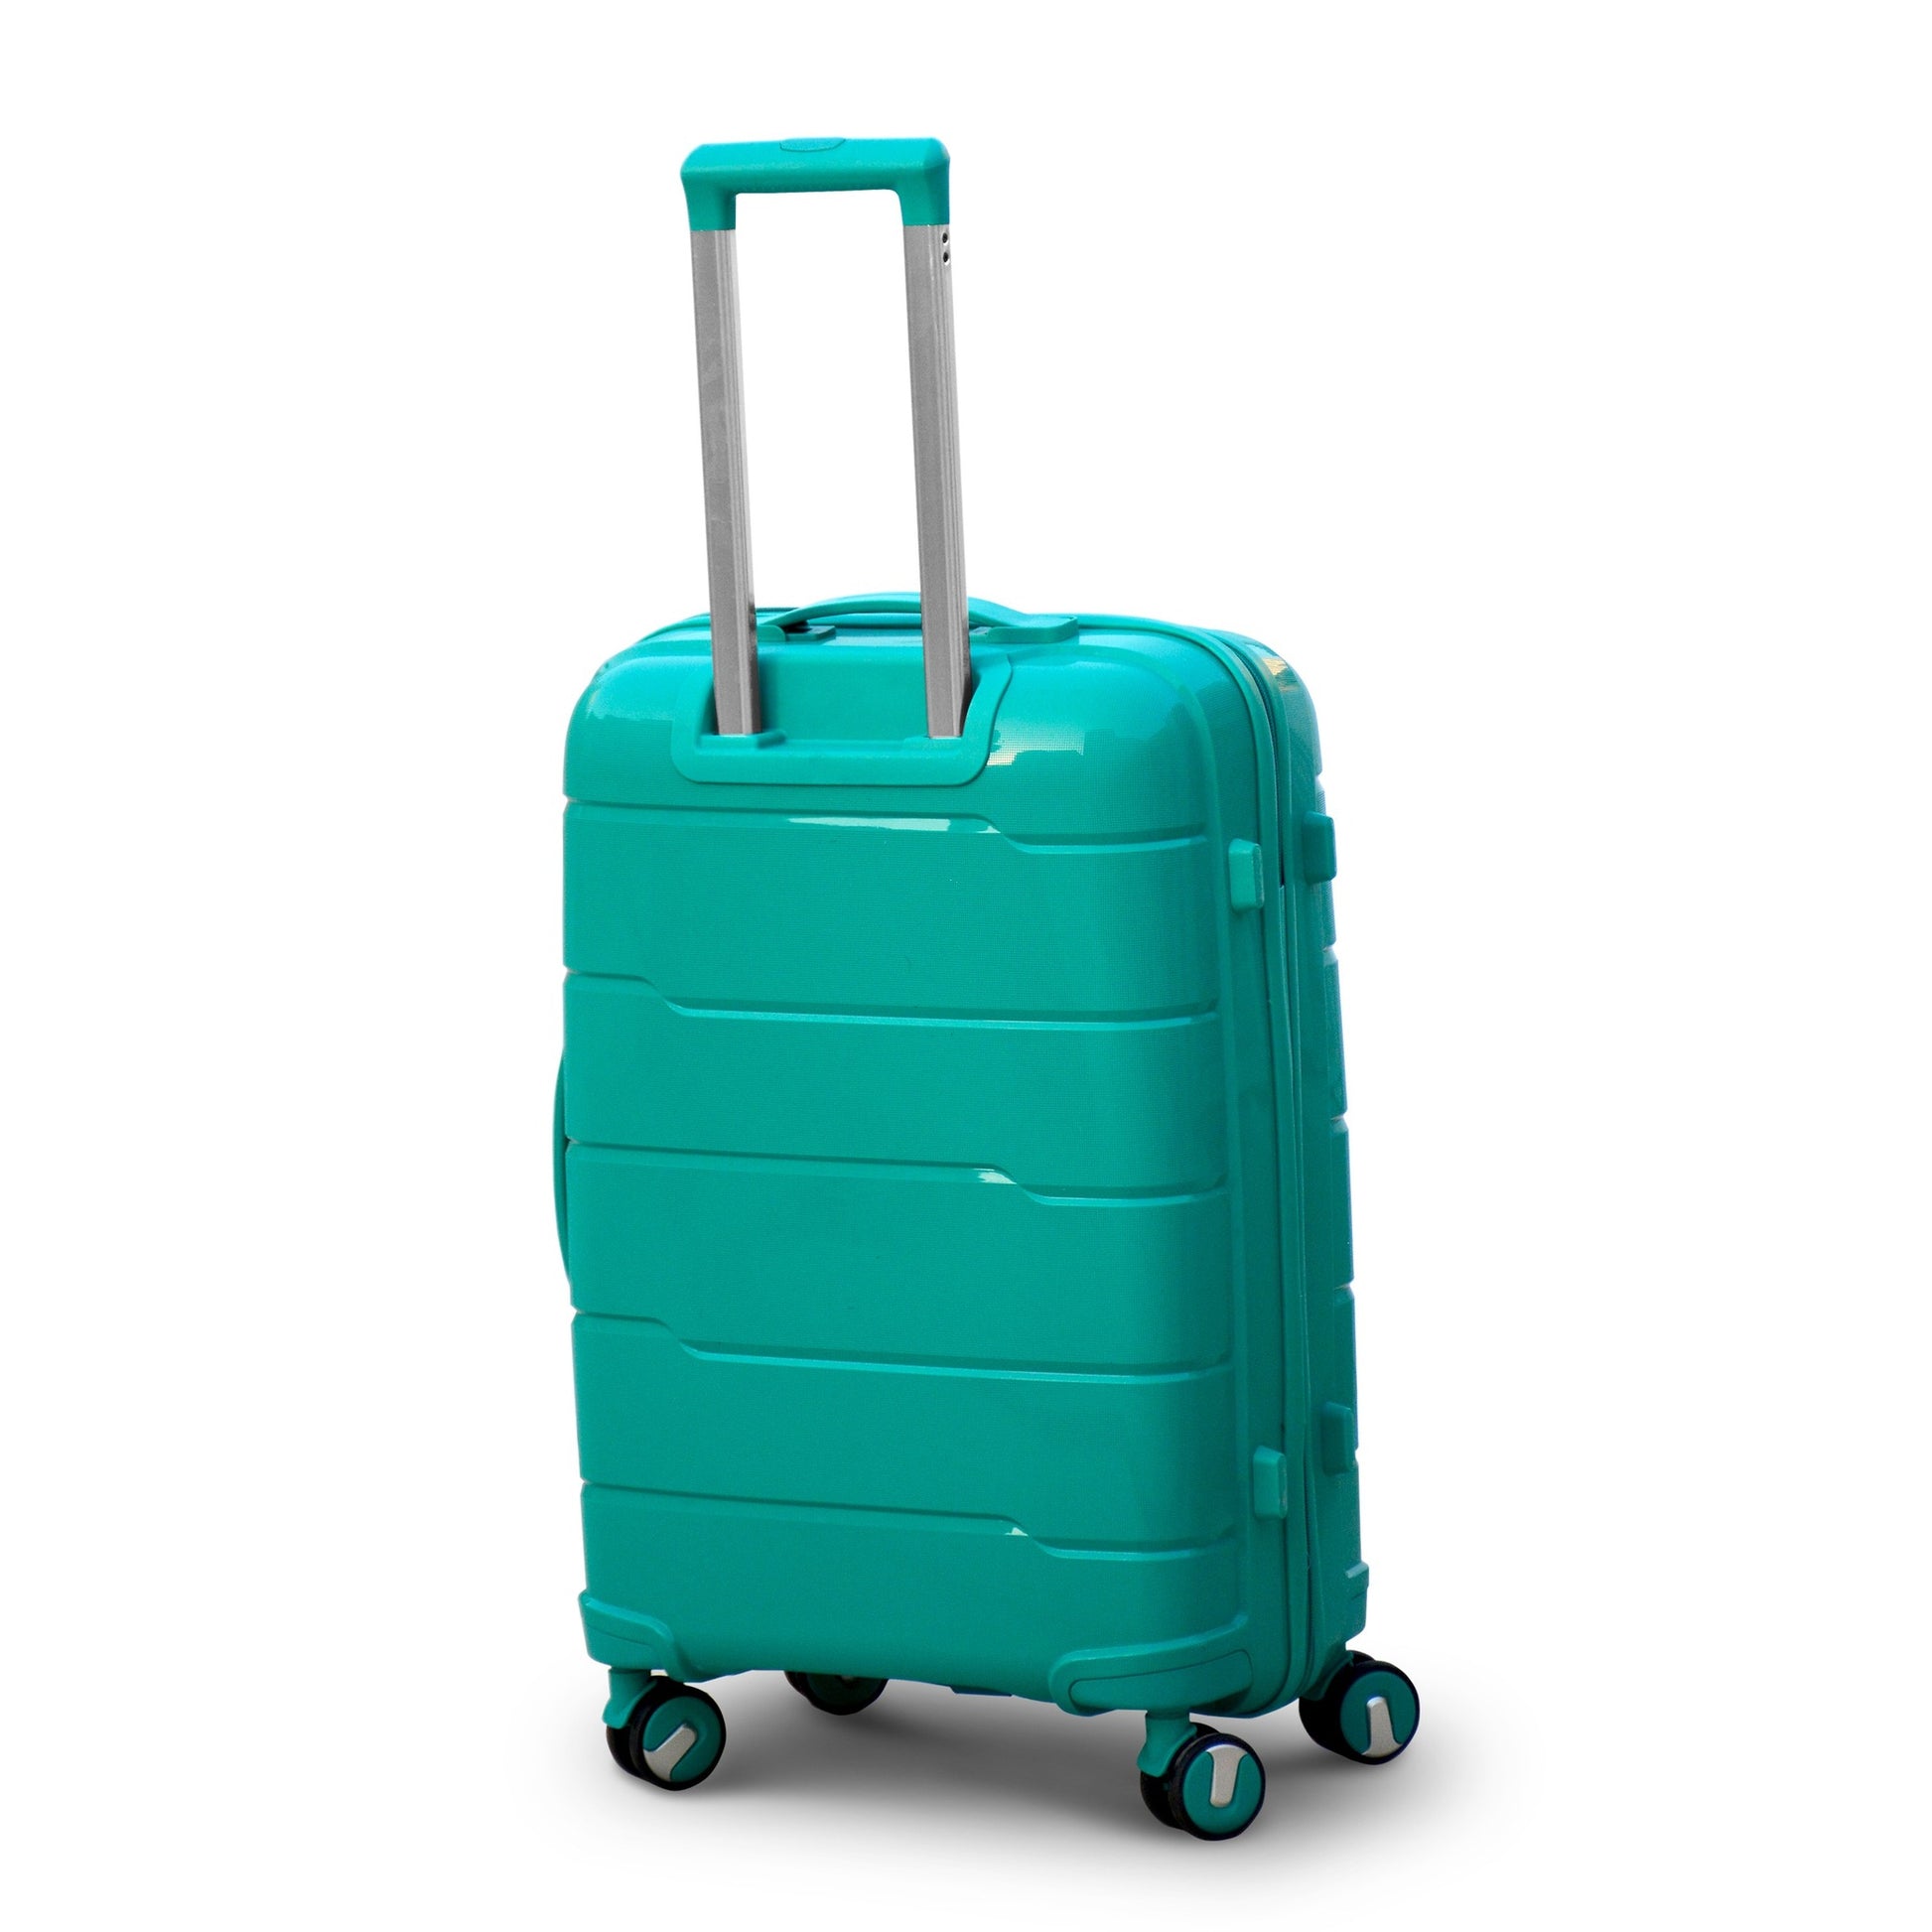 24" Green Colour Non Expandable Ceramic PP Luggage Lightweight Hard Case Trolley Bag With Double Spinner Wheel